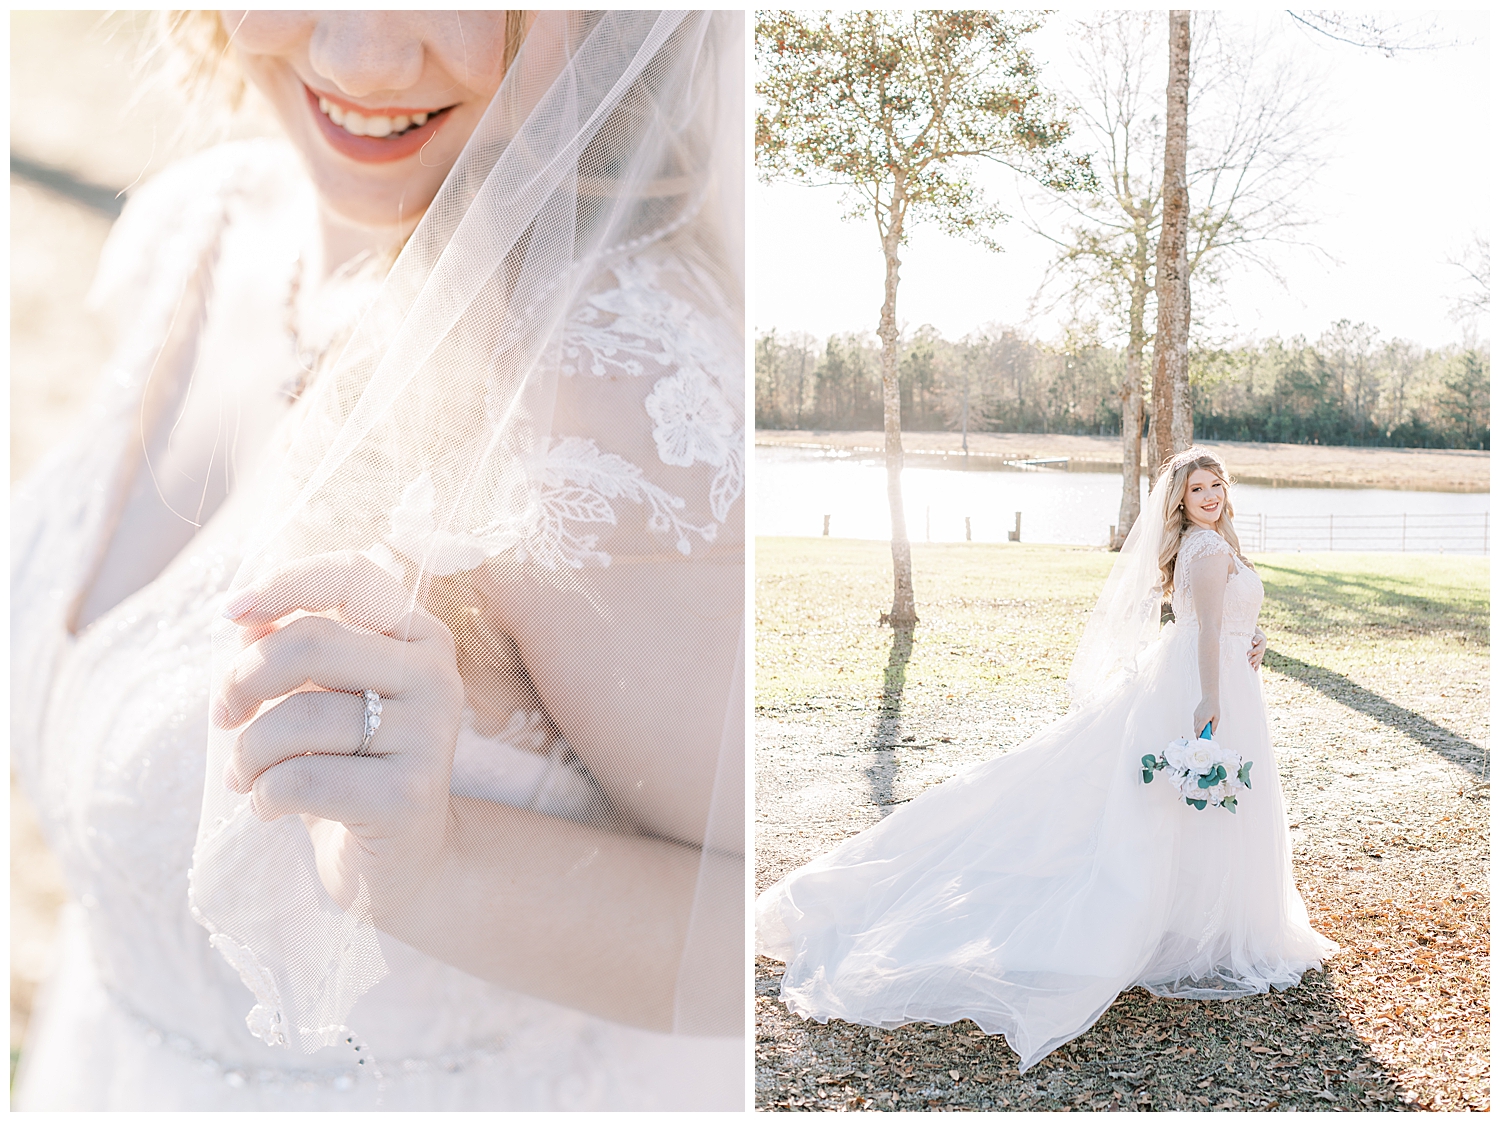 A bride stands in the grass while her dress blows in the wind.